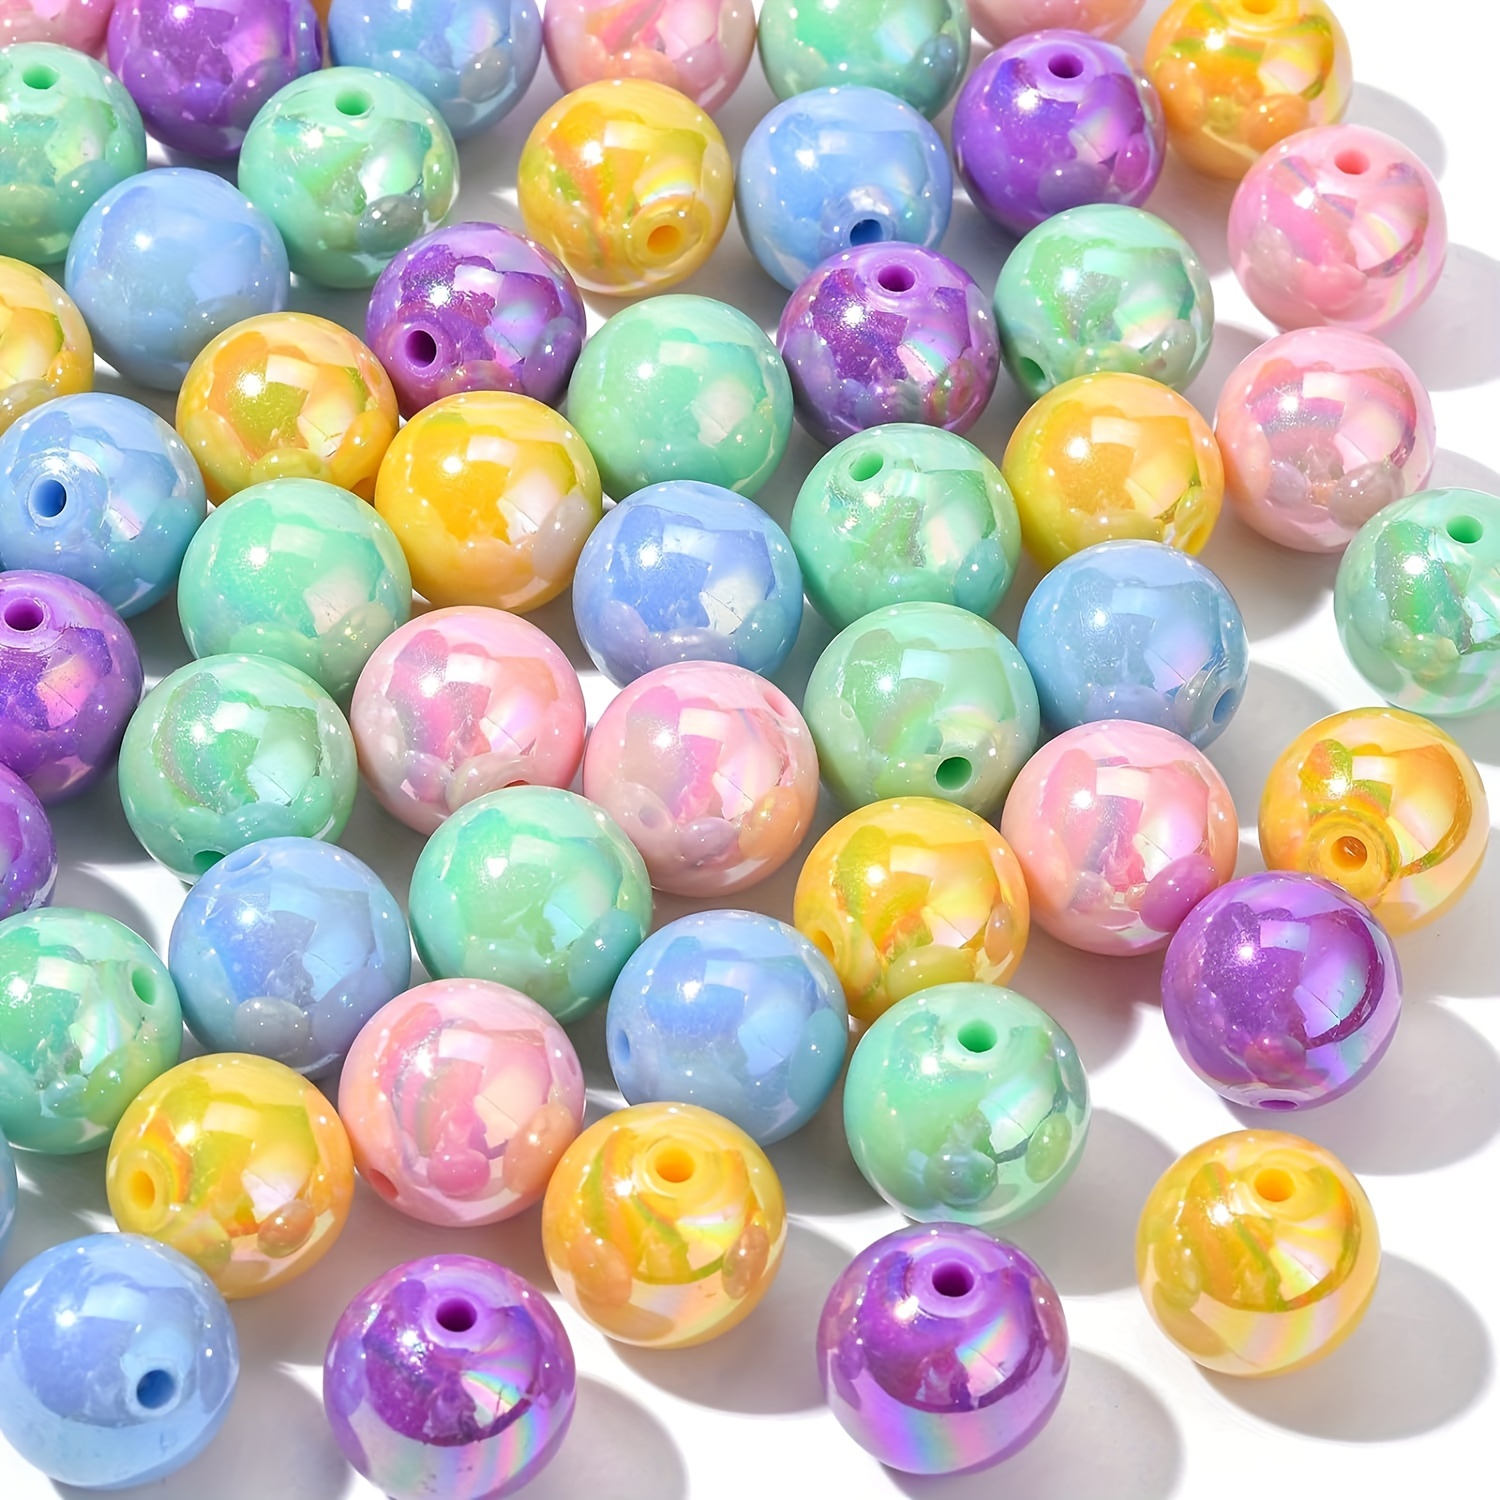 

About 110pcs 20mm Mixed Colors Chunky Bubblegum Round Ball Colorful Ab Plated Acrylic Loose Beads For Jewelry Making Diy Special Fashion Necklace Bracelet Craft Supplies